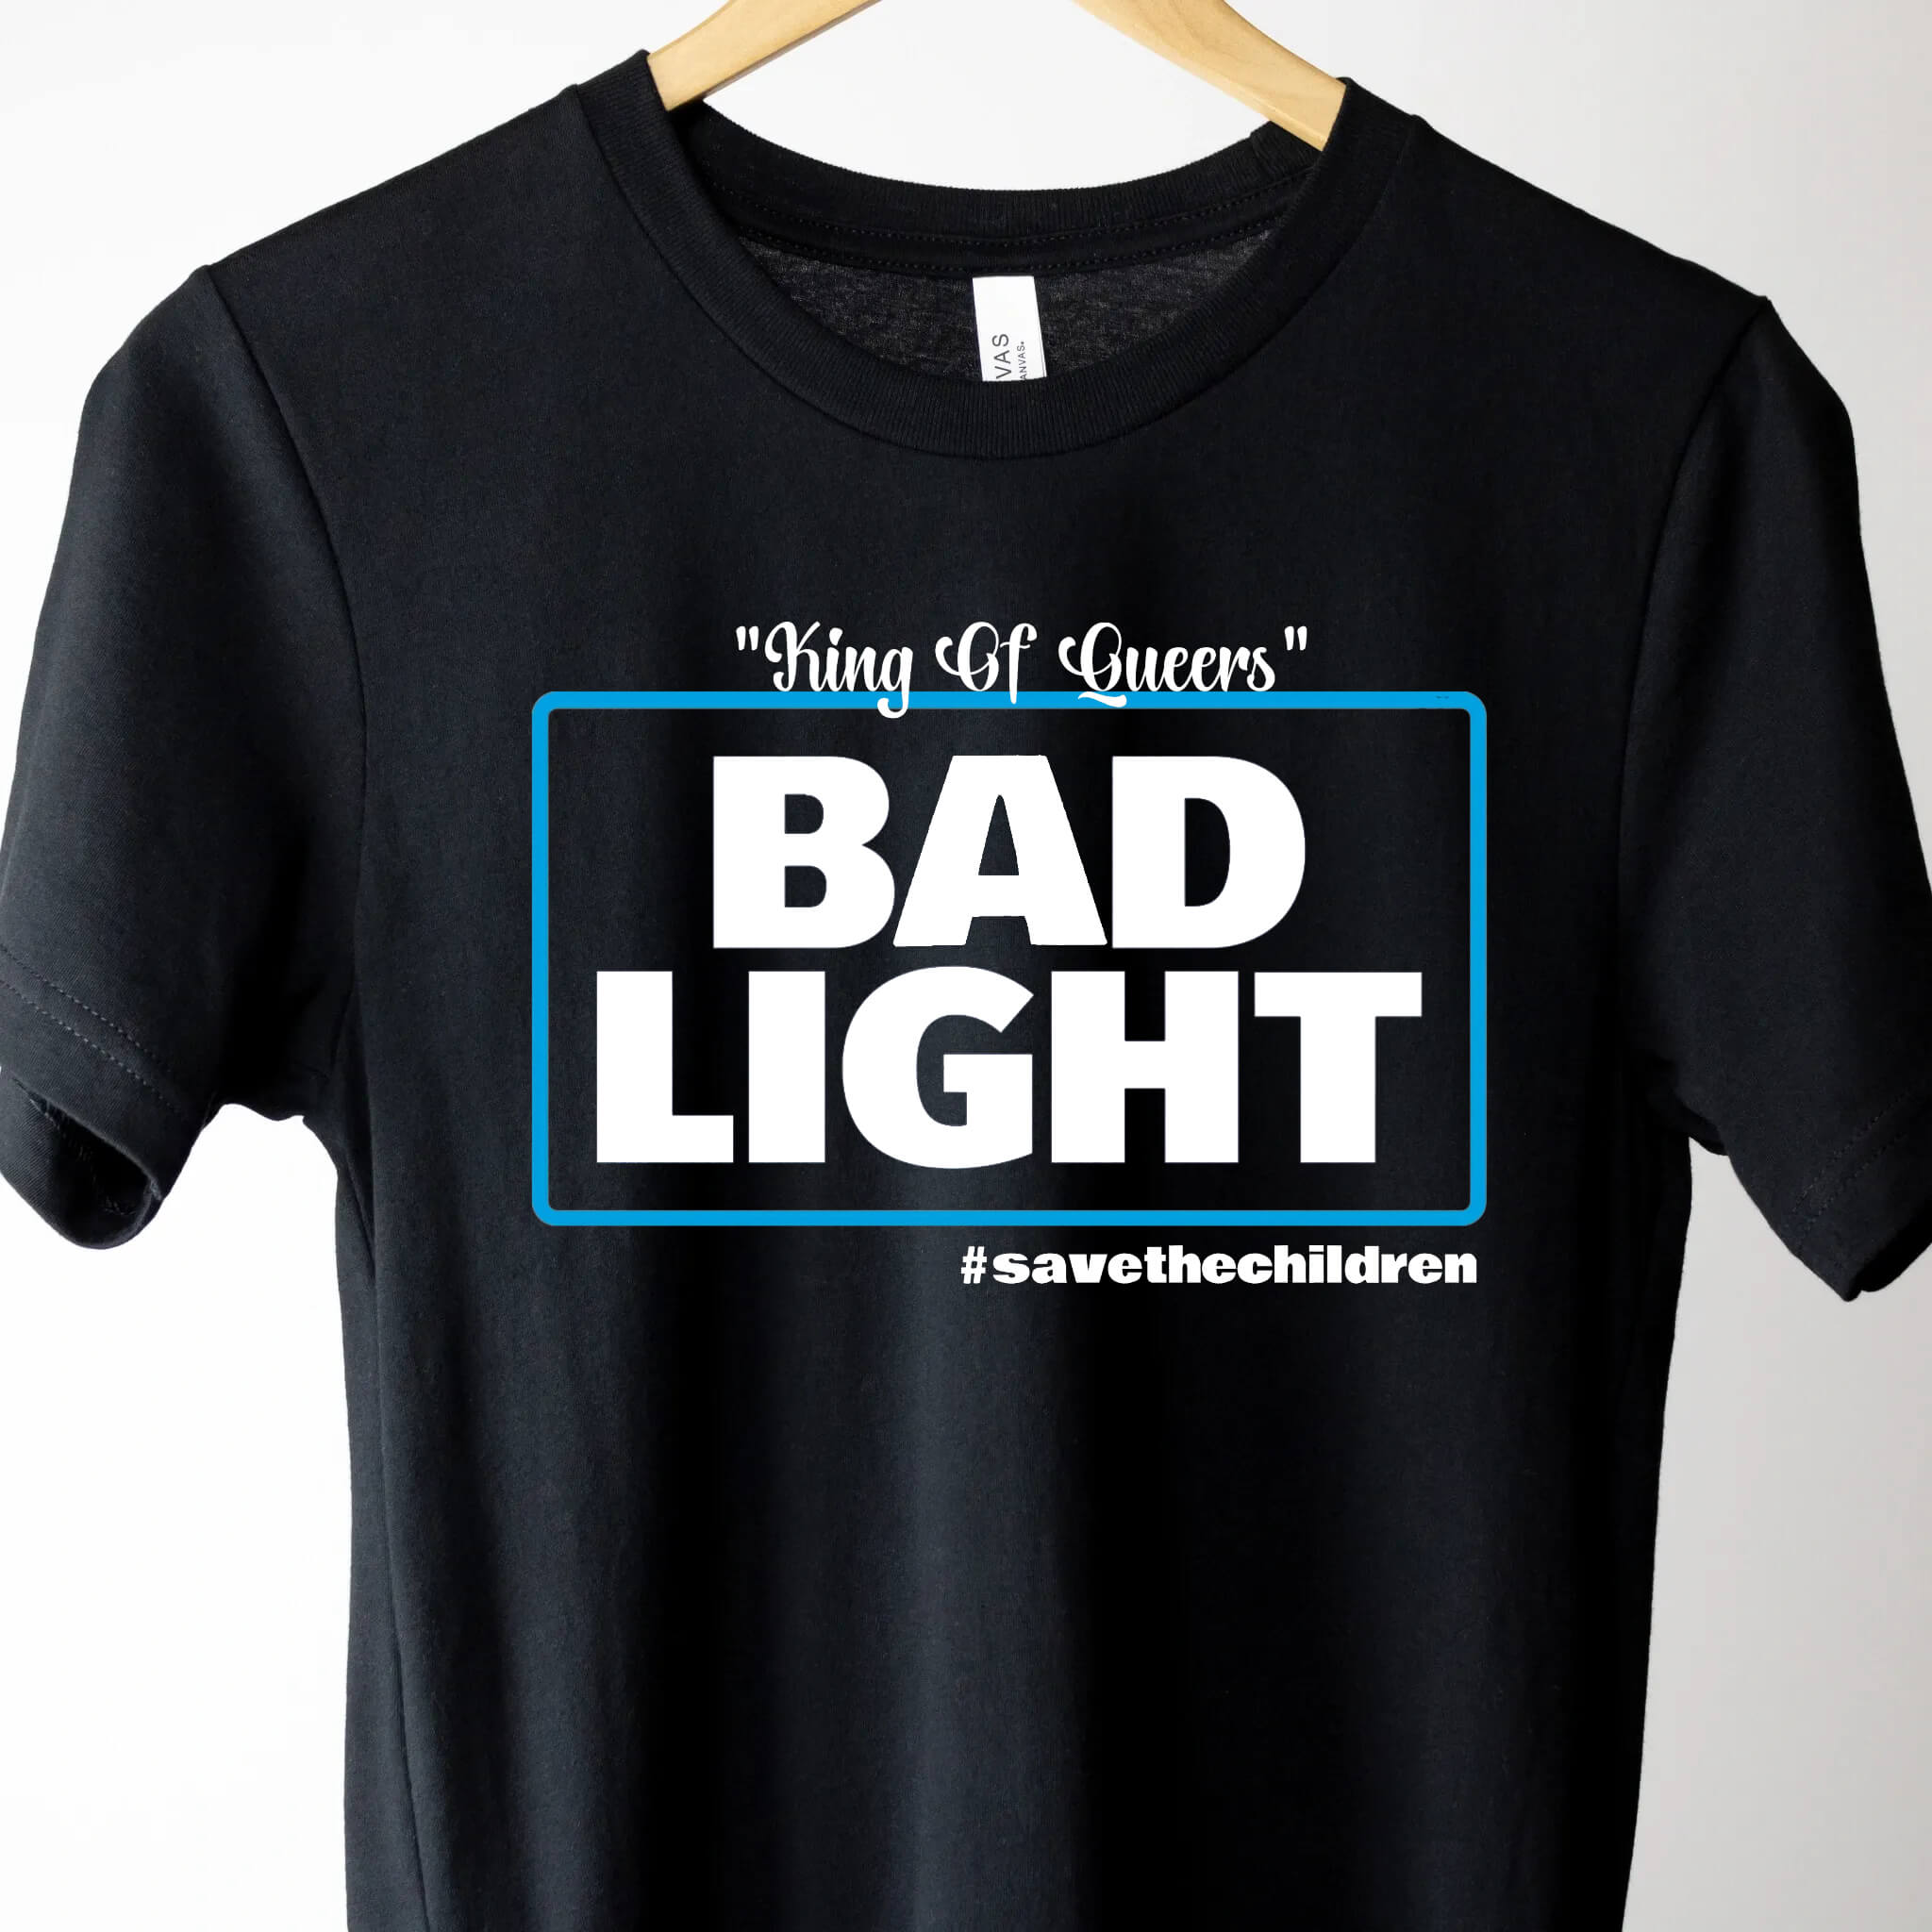 Stop Groomers, Bad Light King of Queers, Stop Targeting Our Kids, Boycott Bud Light, Cancel Bud Light, Bud Light, Save The Children Adult T-Shirt